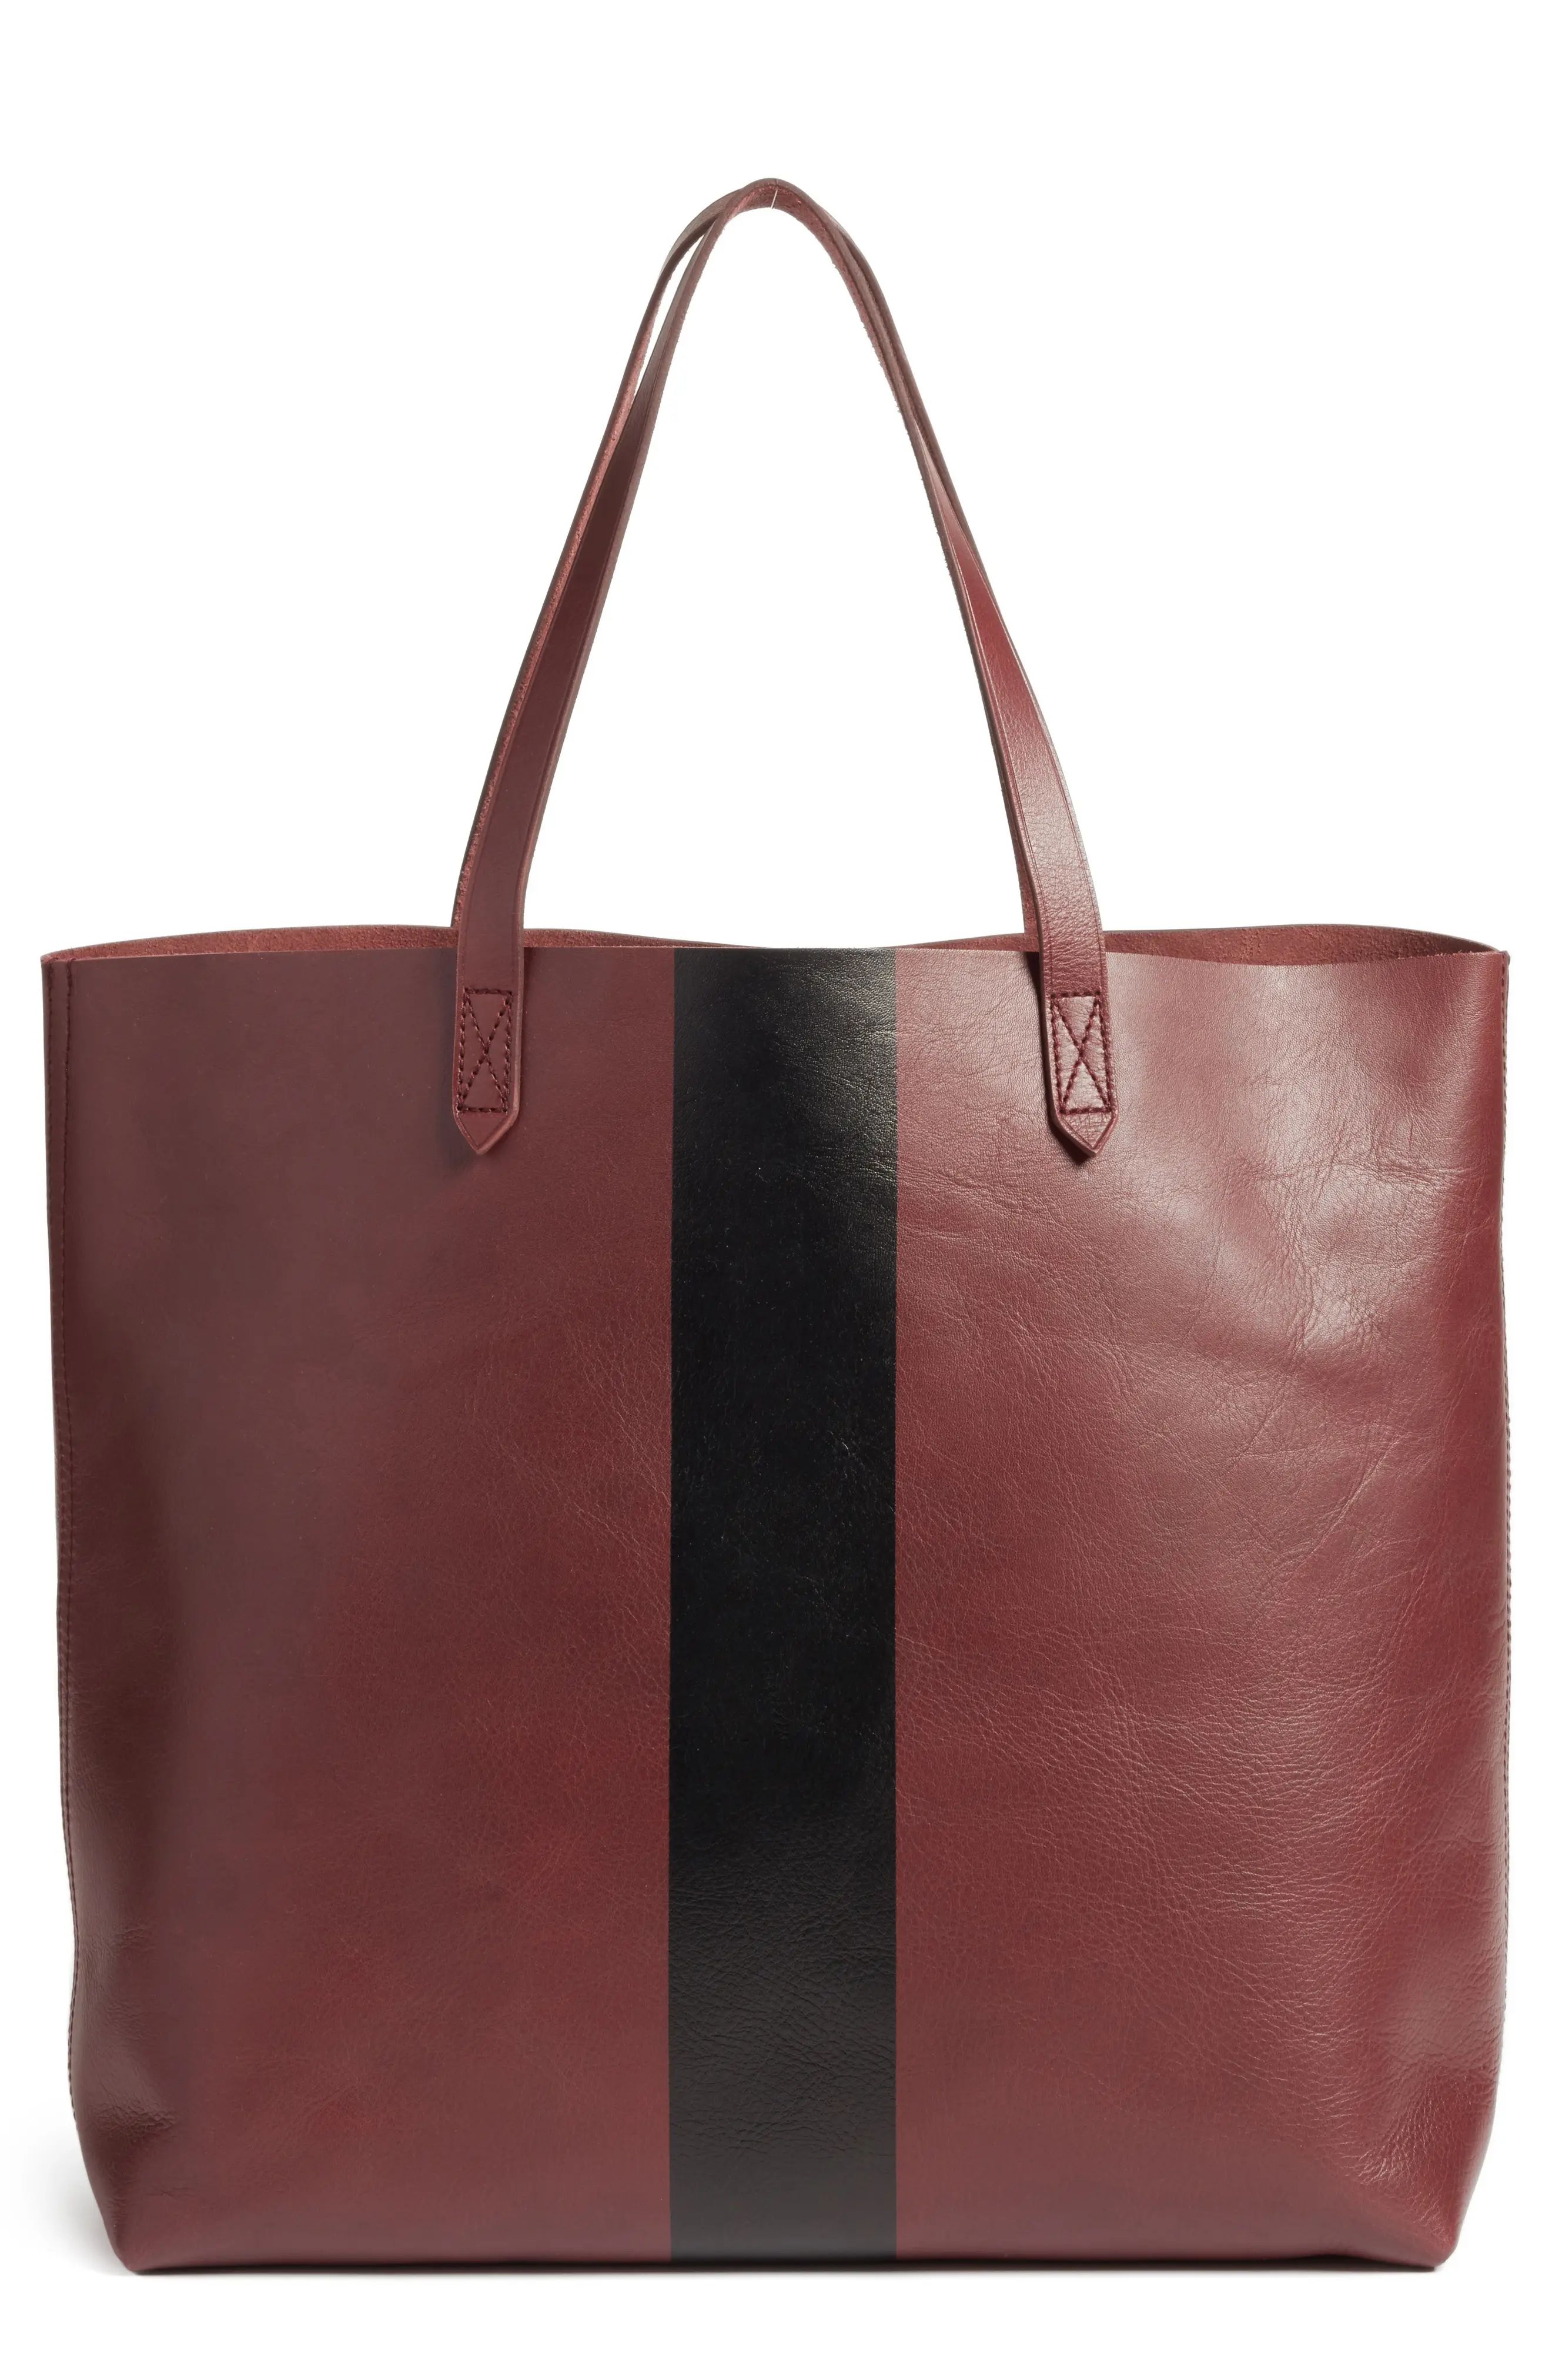 Madewell Paint Stripe Transport Leather Tote | Nordstrom